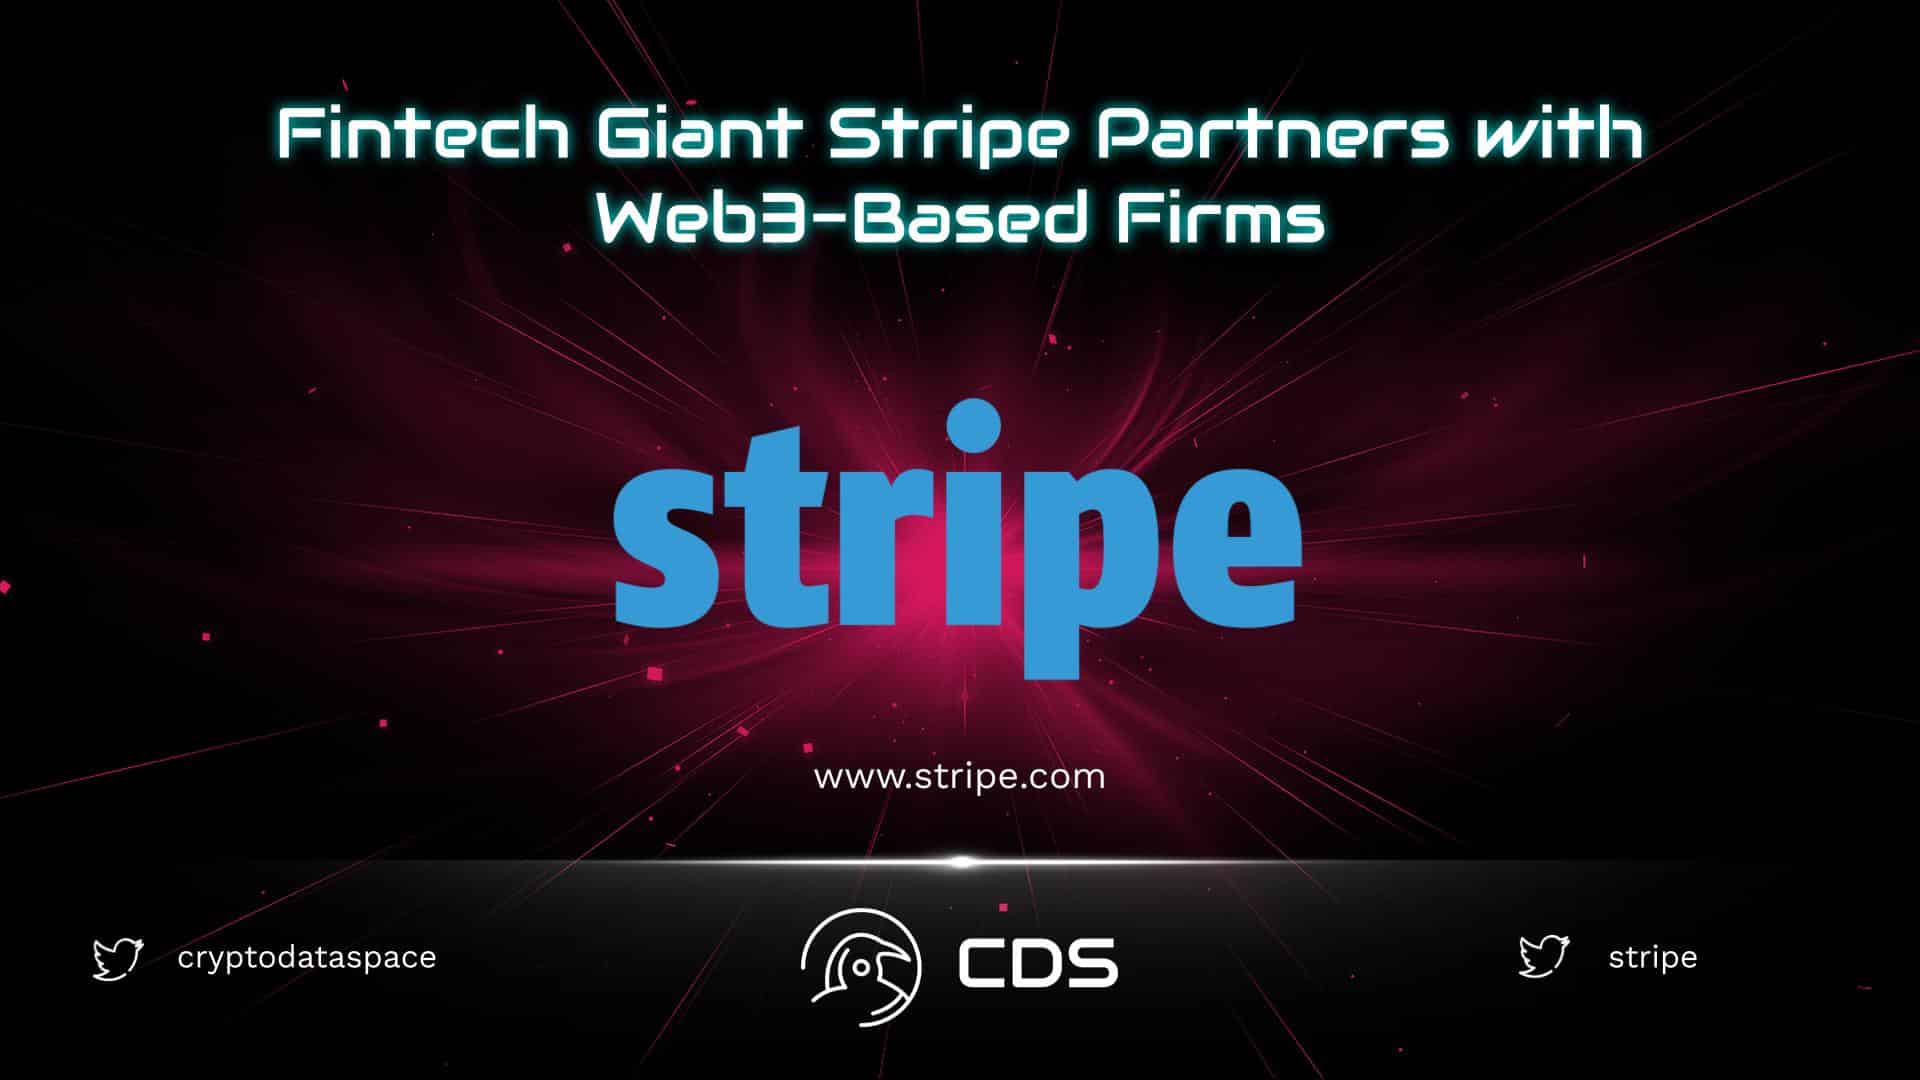 Fintech Giant Stripe Partners with Web3-Based Firms